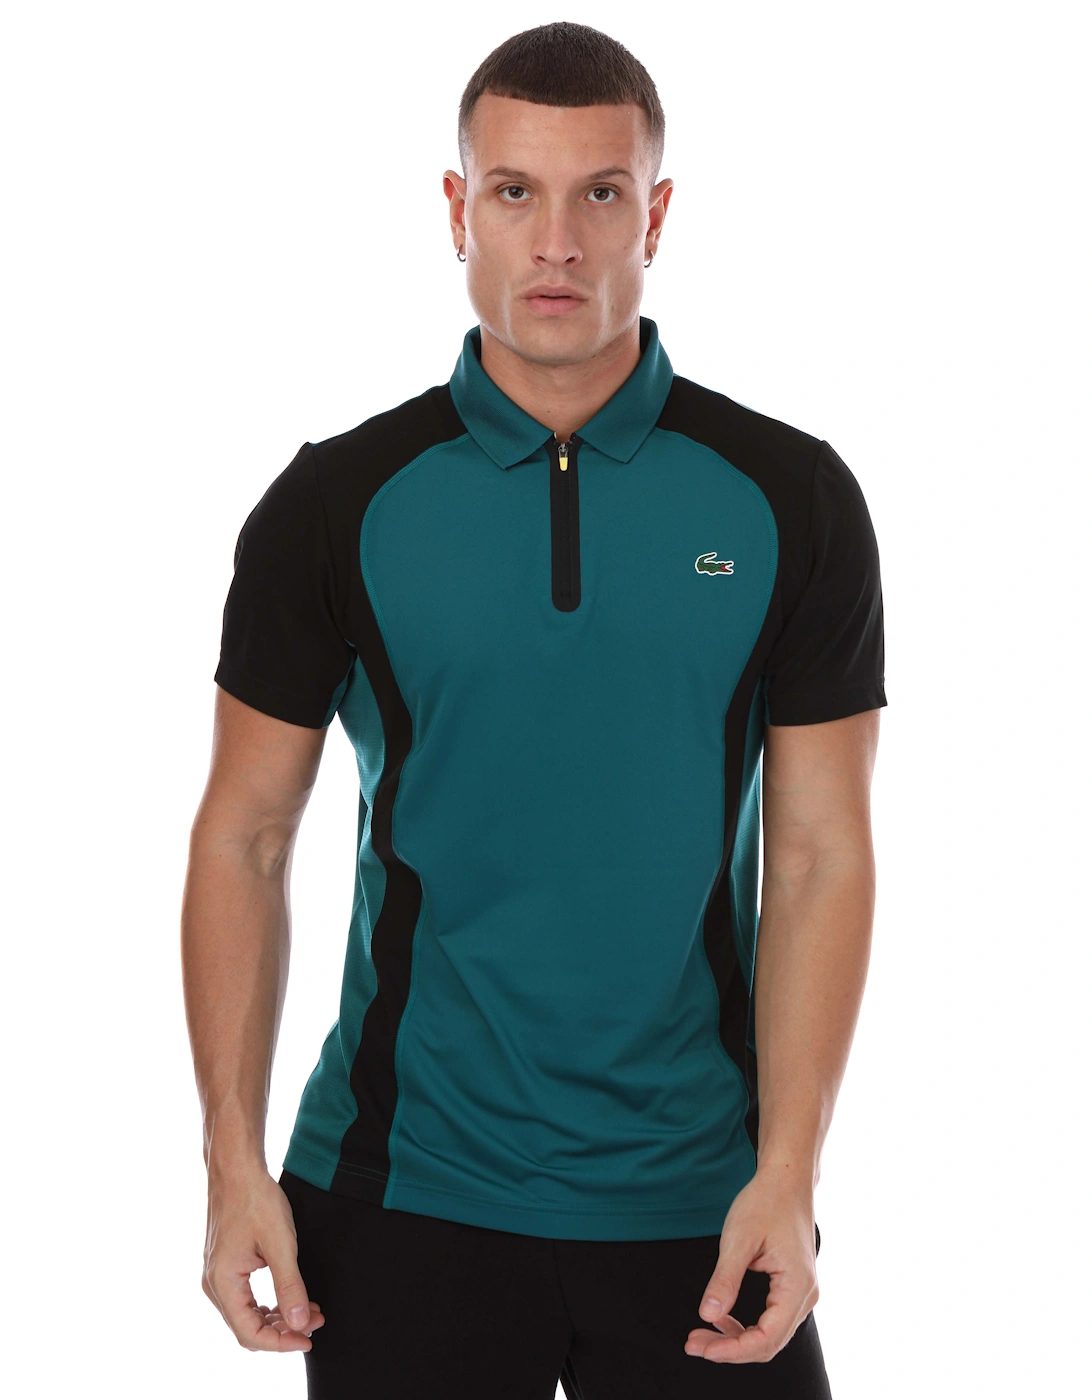  Mens Sport Colour-Block Ultra Dry Pique Polo Shirt in Green black - Size X-Small